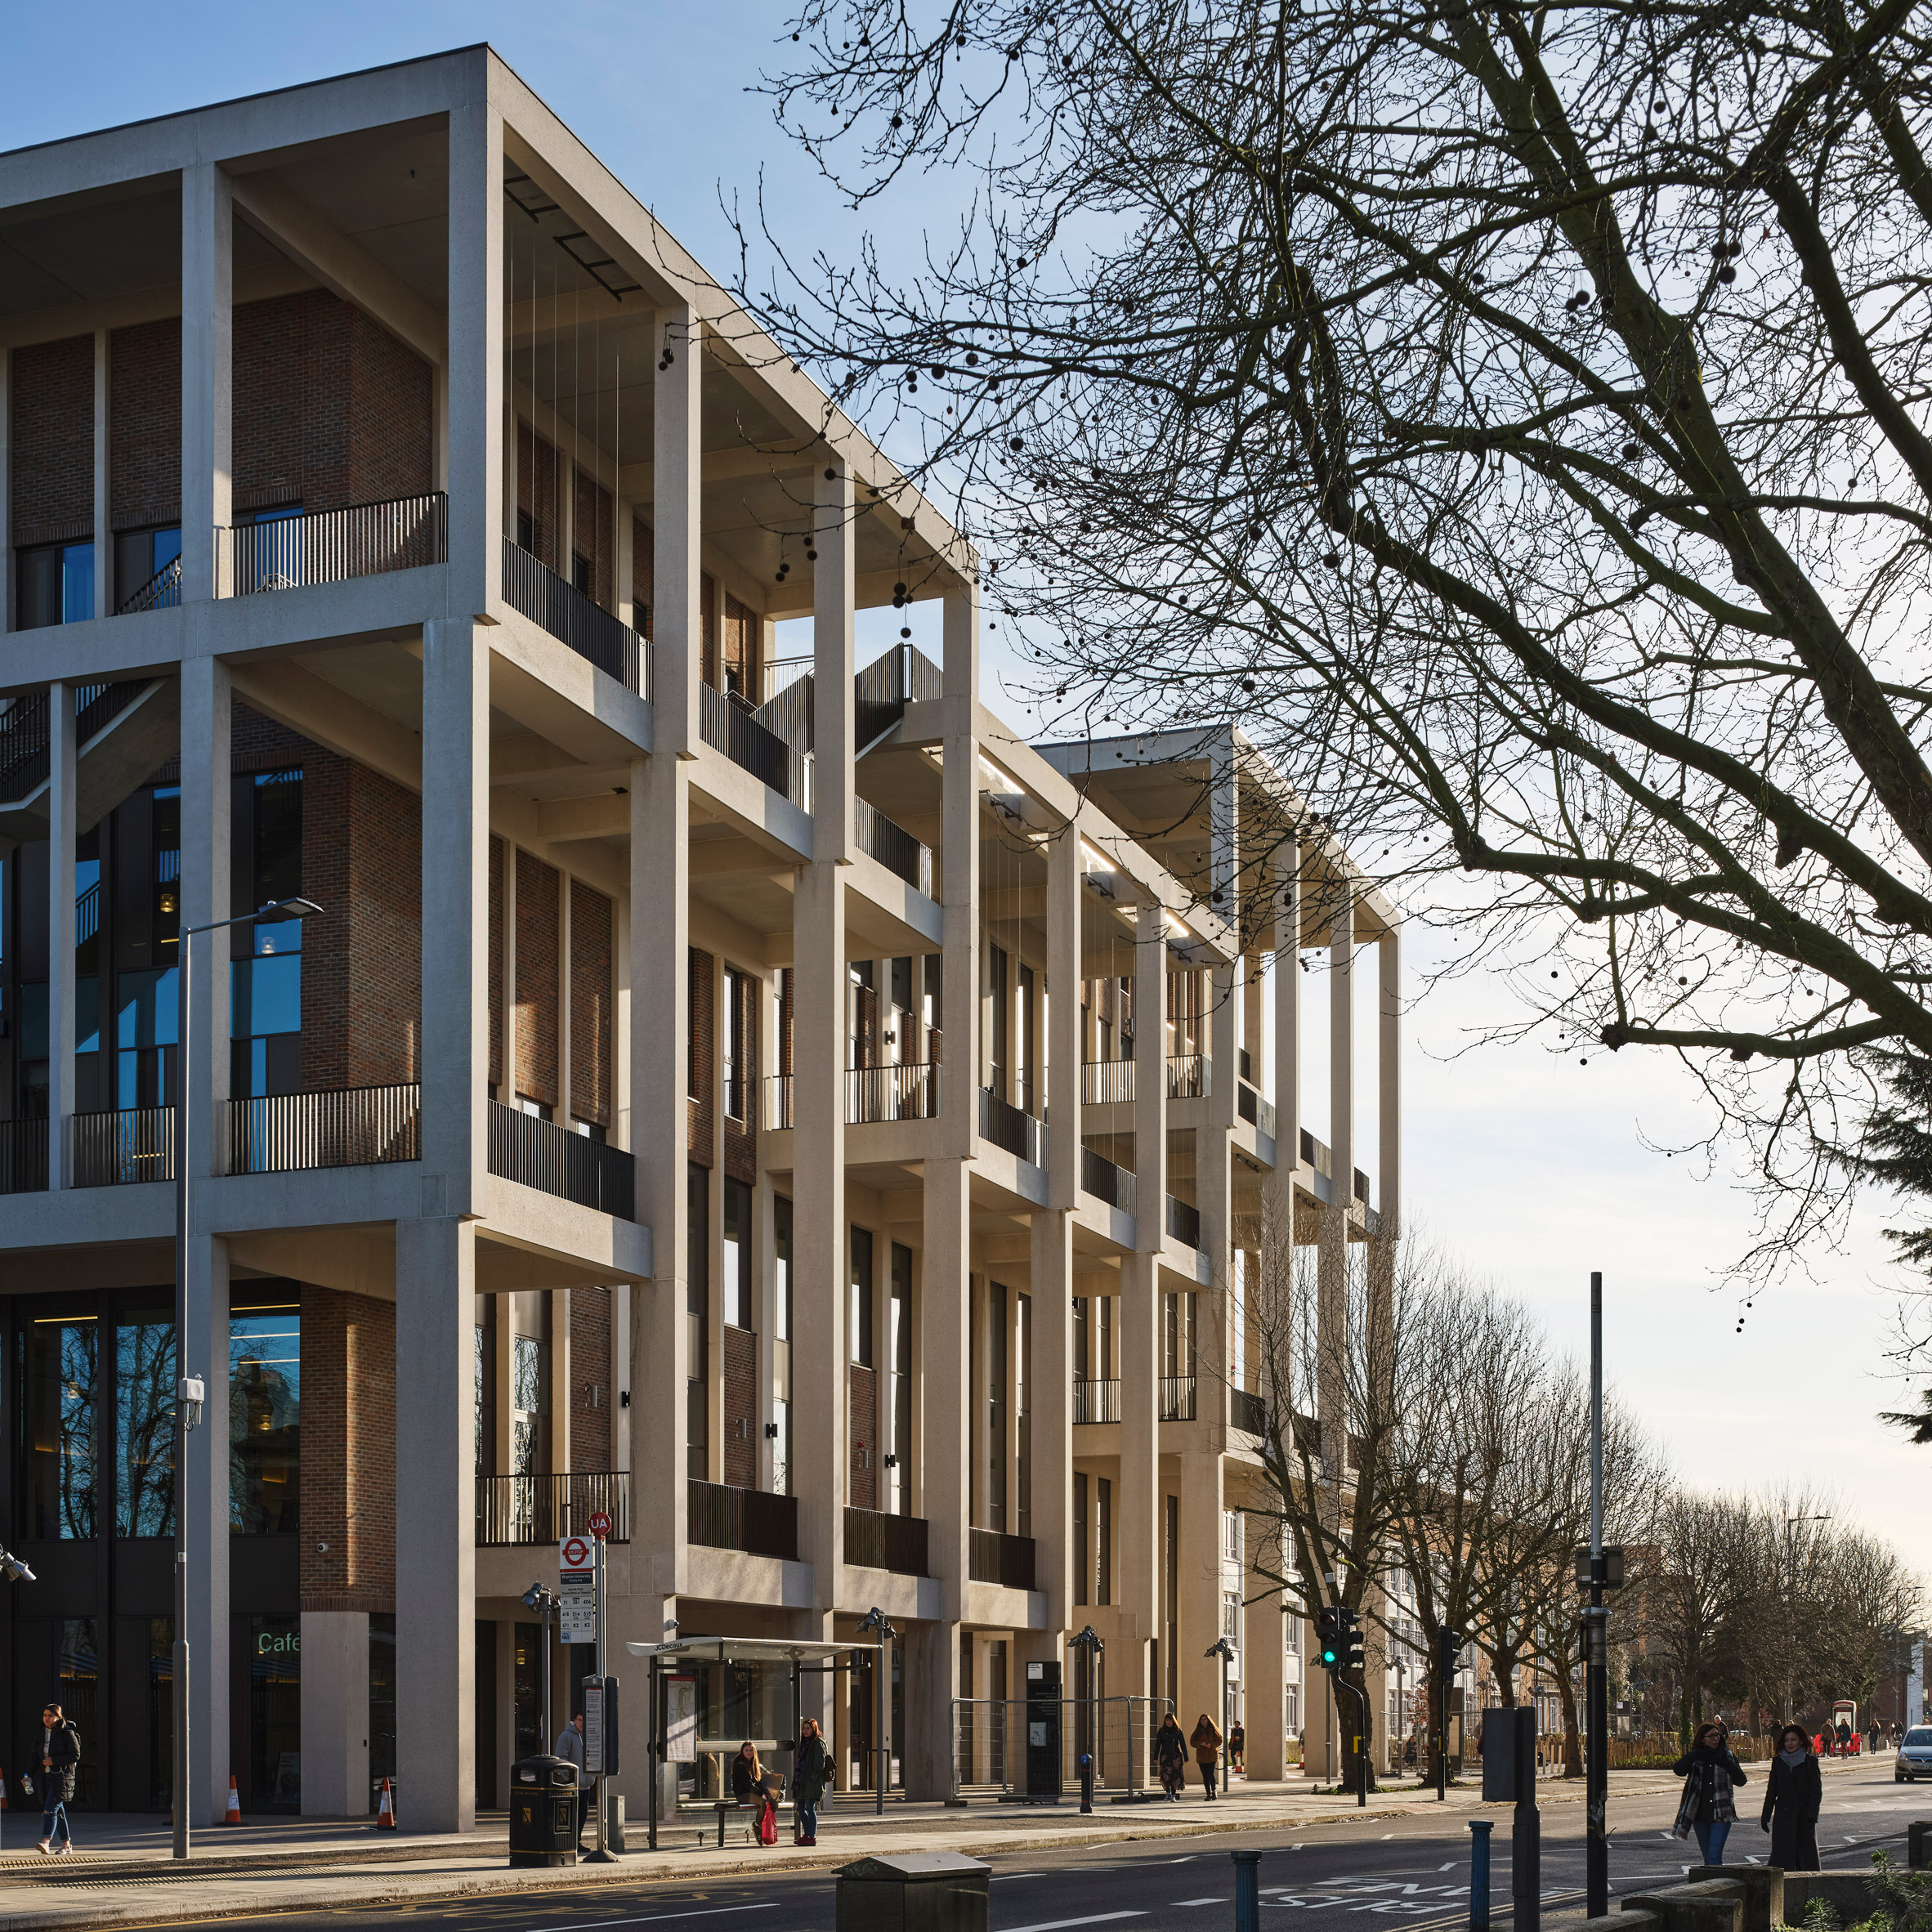 Top 10 British architecture projects of 2020: Town House by Grafton Architects for Kingston University, UK